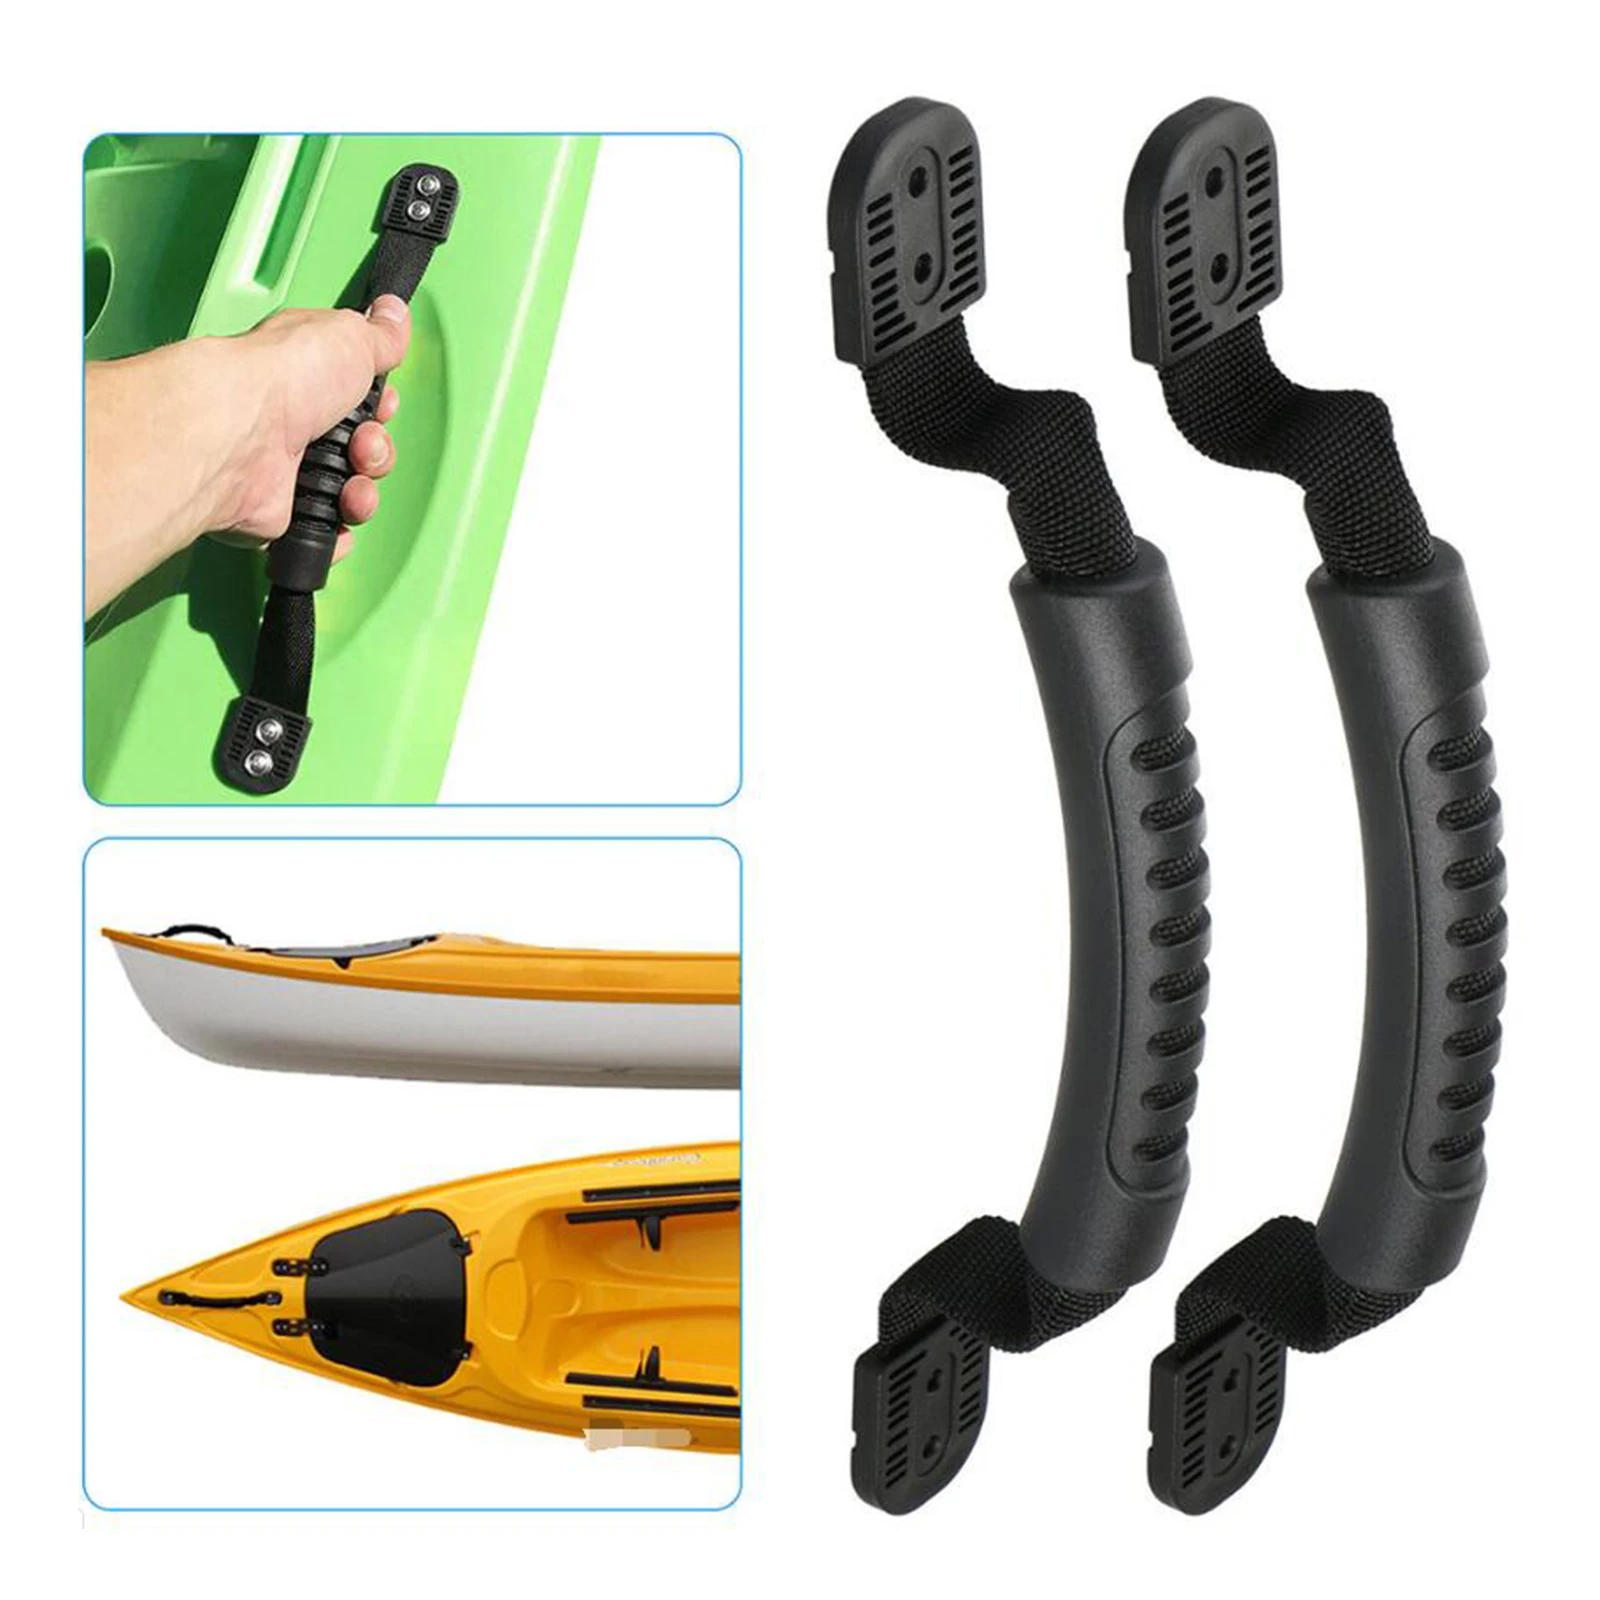 Kayak Replacement Carry Handle Pair Rubber Canoe Boat Handles Side Mount 